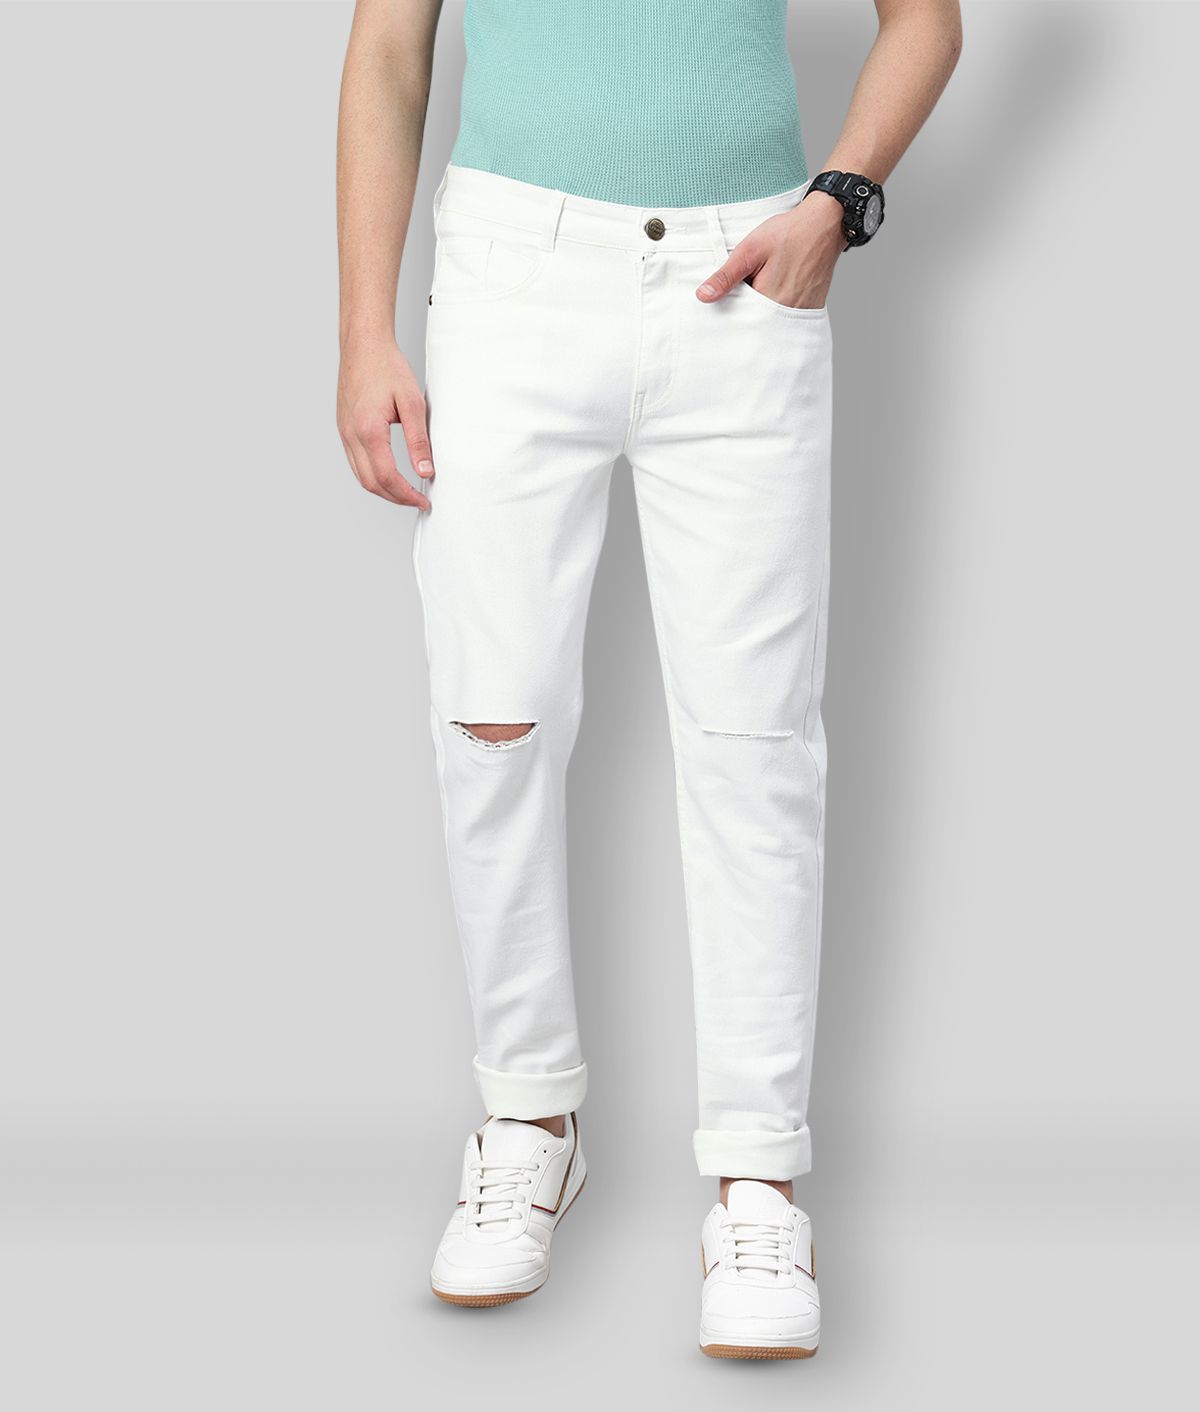     			Urbano Fashion - White Cotton Blend Slim Fit Men's Jeans ( Pack of 1 )